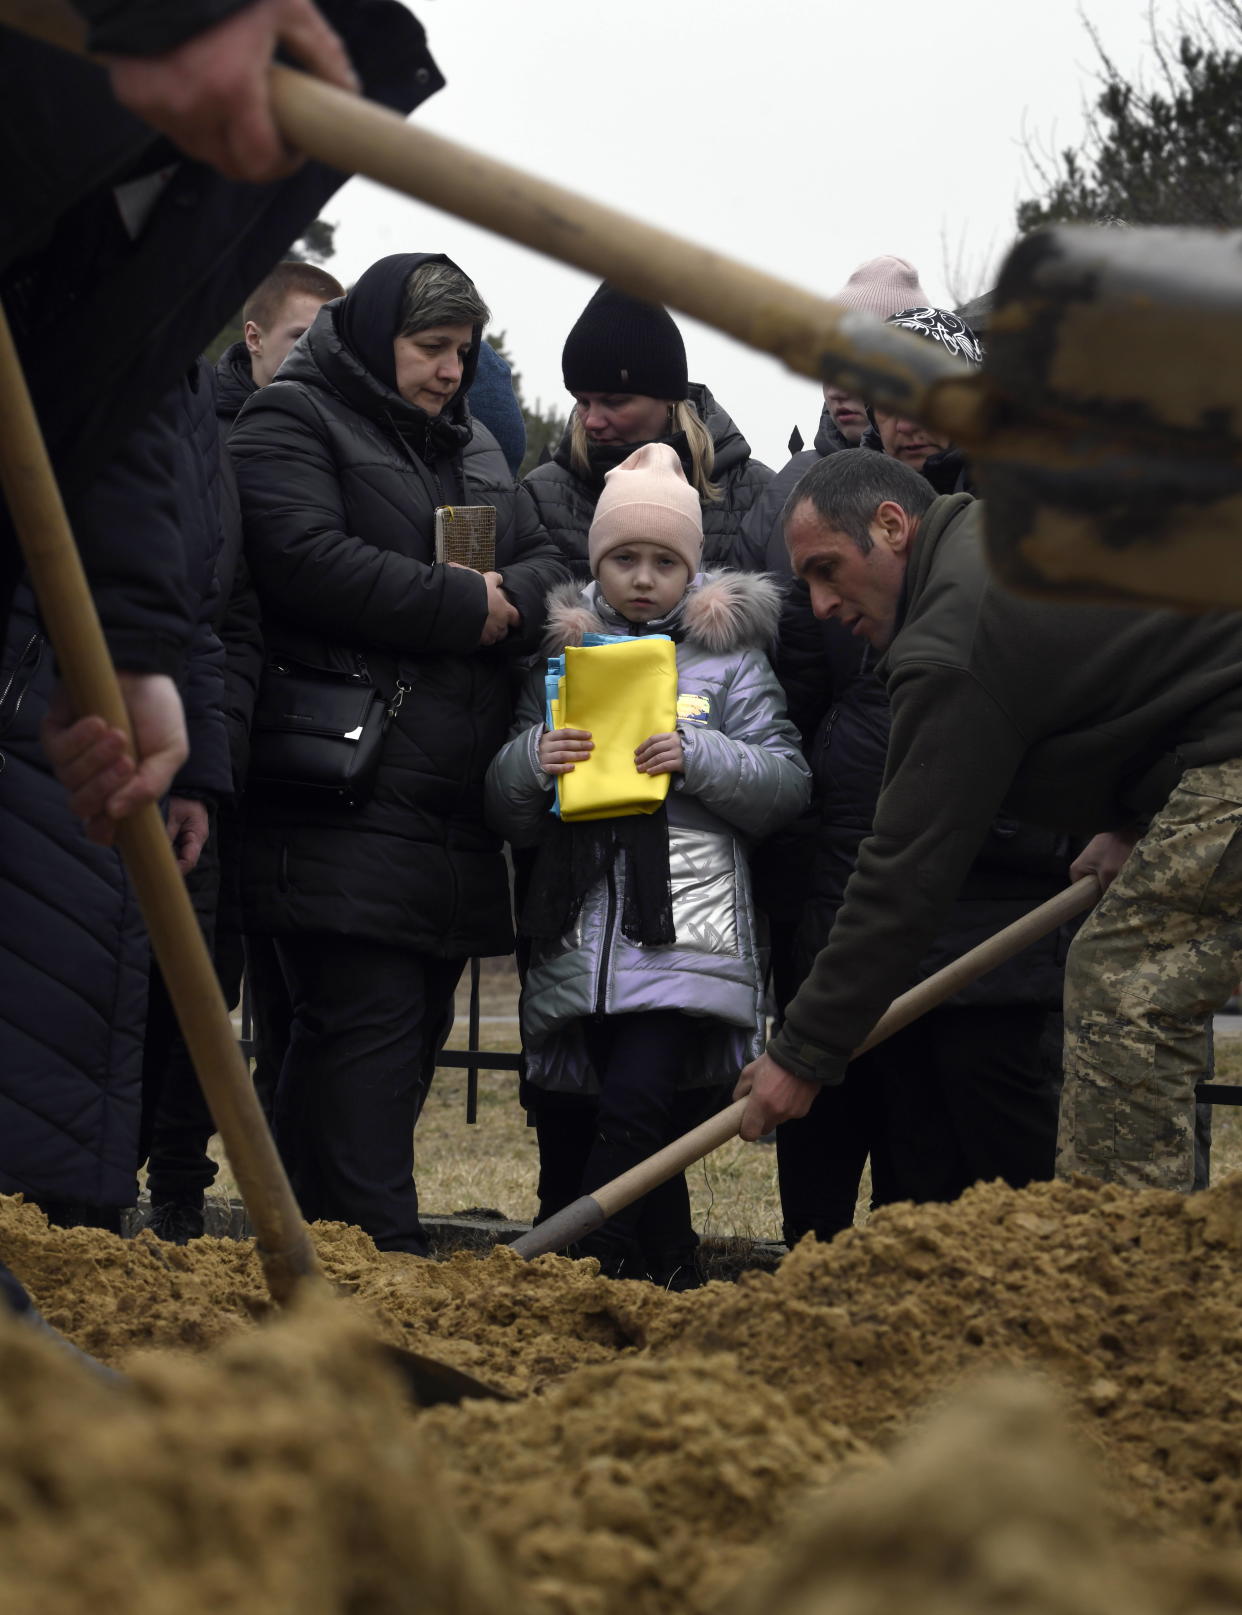 A child looks on as the burial service takes place at a local cemetery.